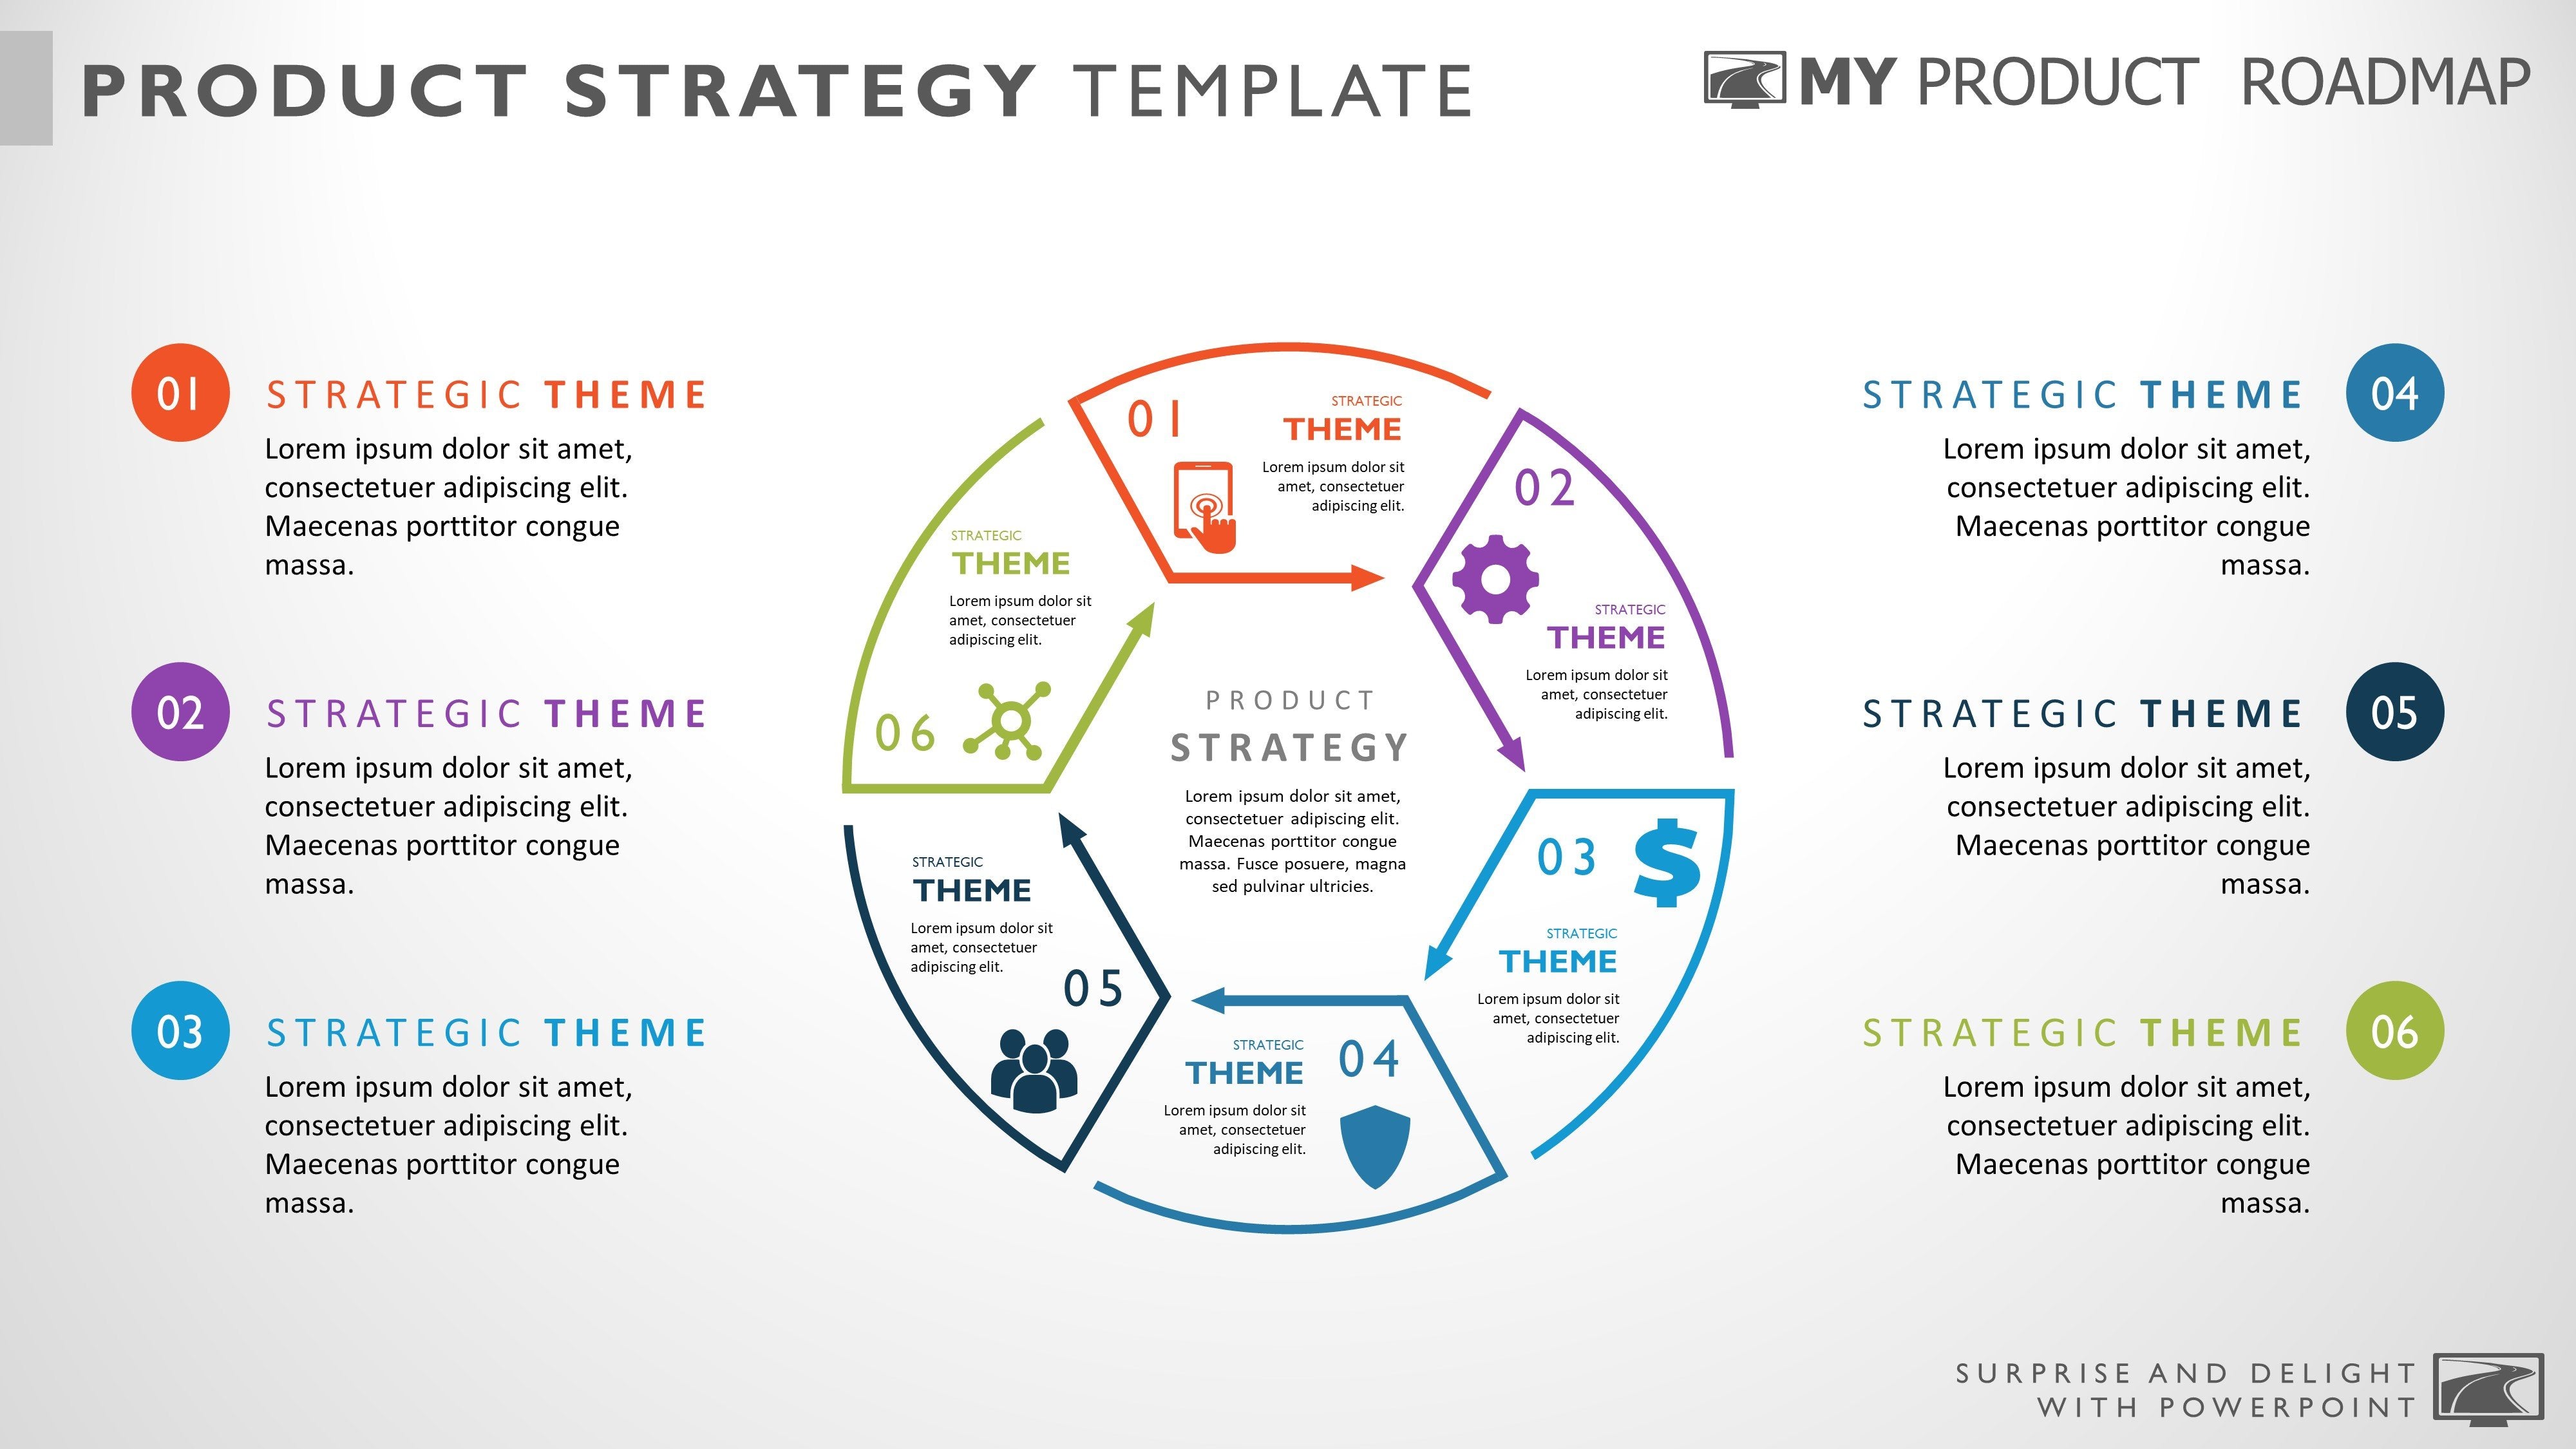 6 Step Circular Product Strategy Templates My Product Roadmap